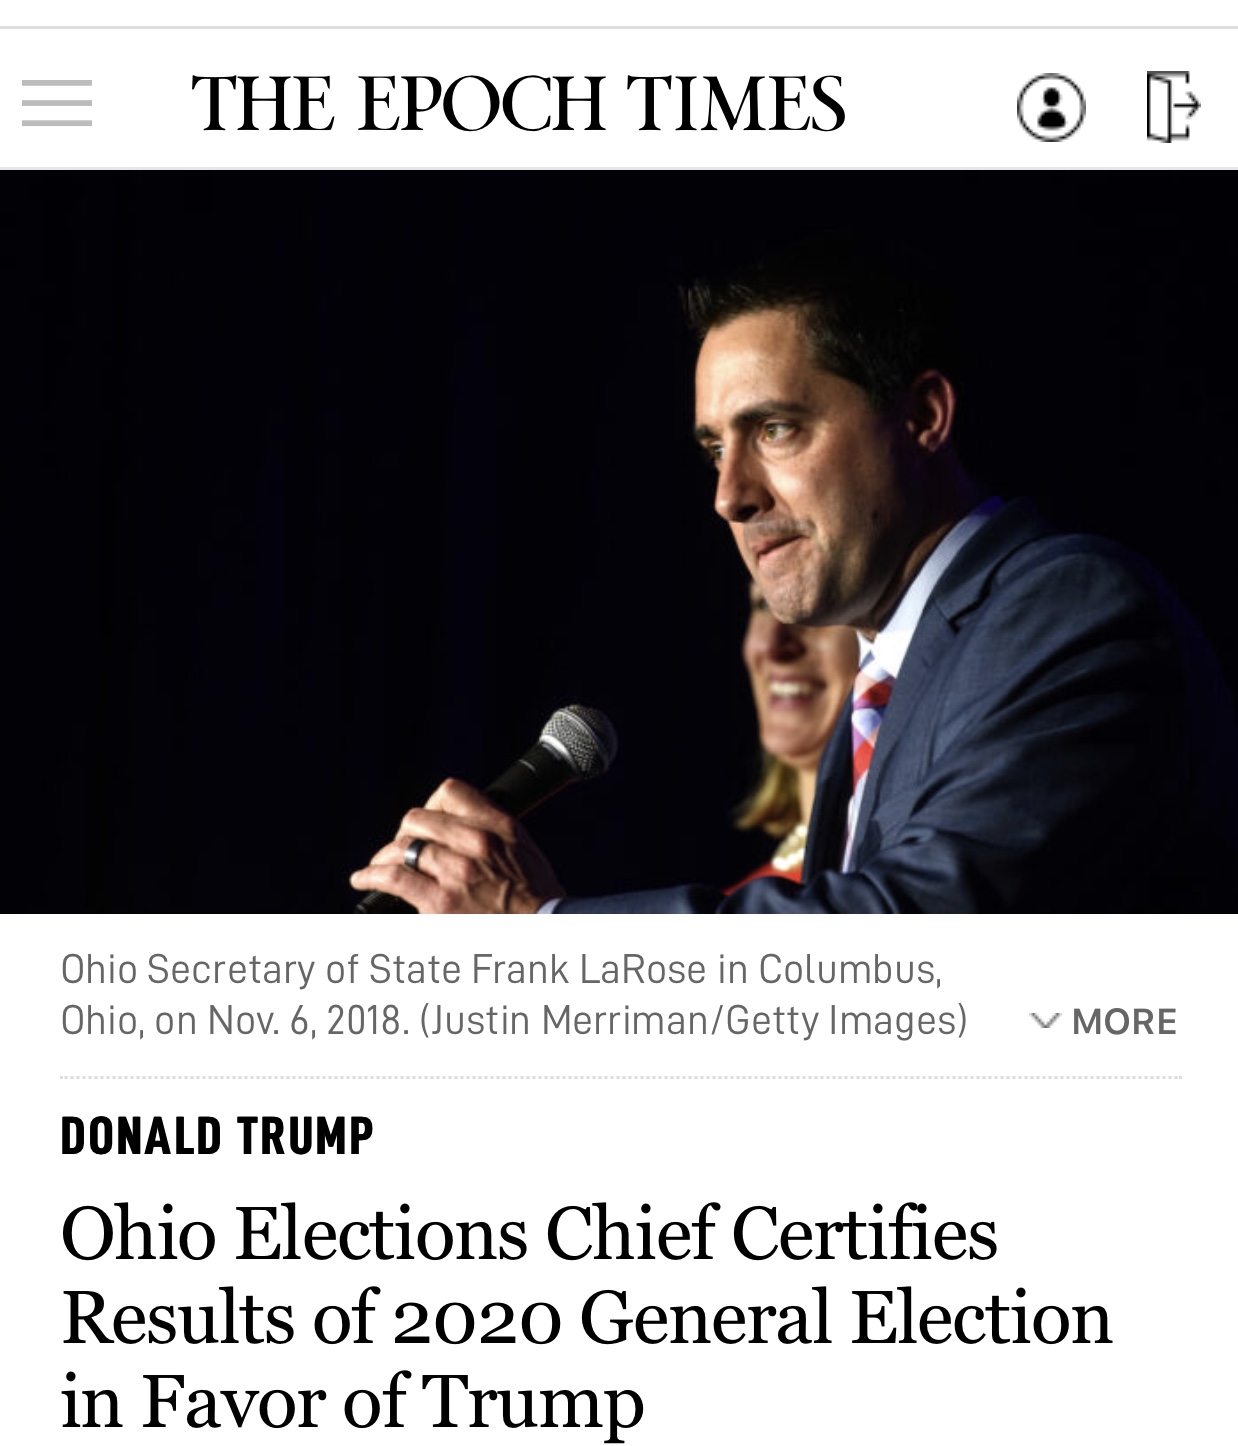 Ohio Elections Chief Certifies Results of 2020 General Election in Favor of President Trump